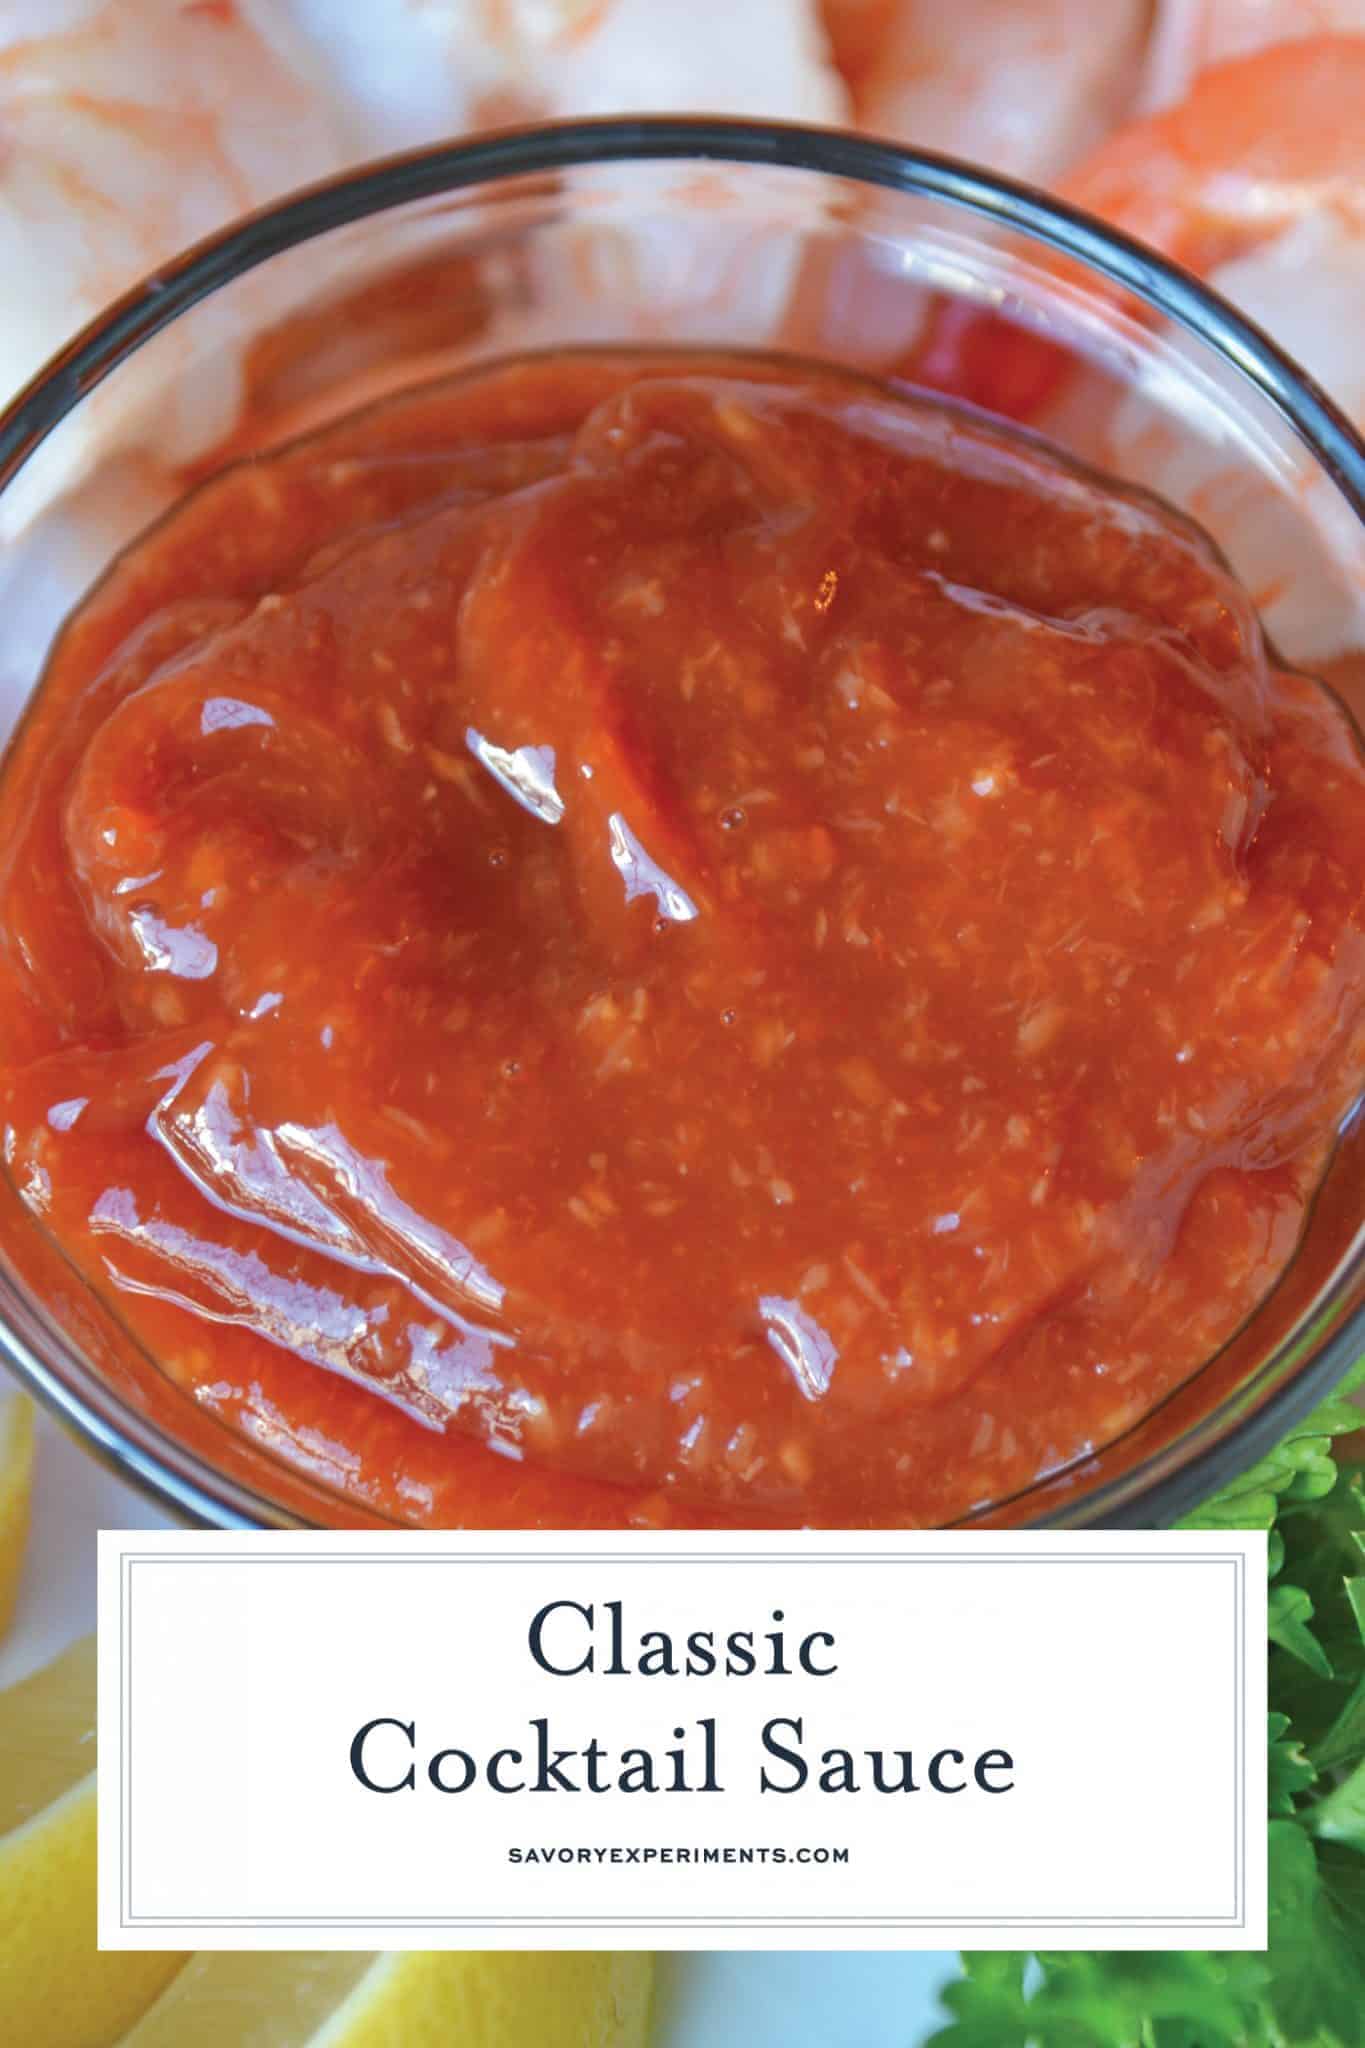 Classic Cocktail Sauce is more than just ketchup and horseradish. Come see how to make a spectacular, restaurant quality sauce in just 5 minutes! #cocktailsauce www.savoryexperiments.com